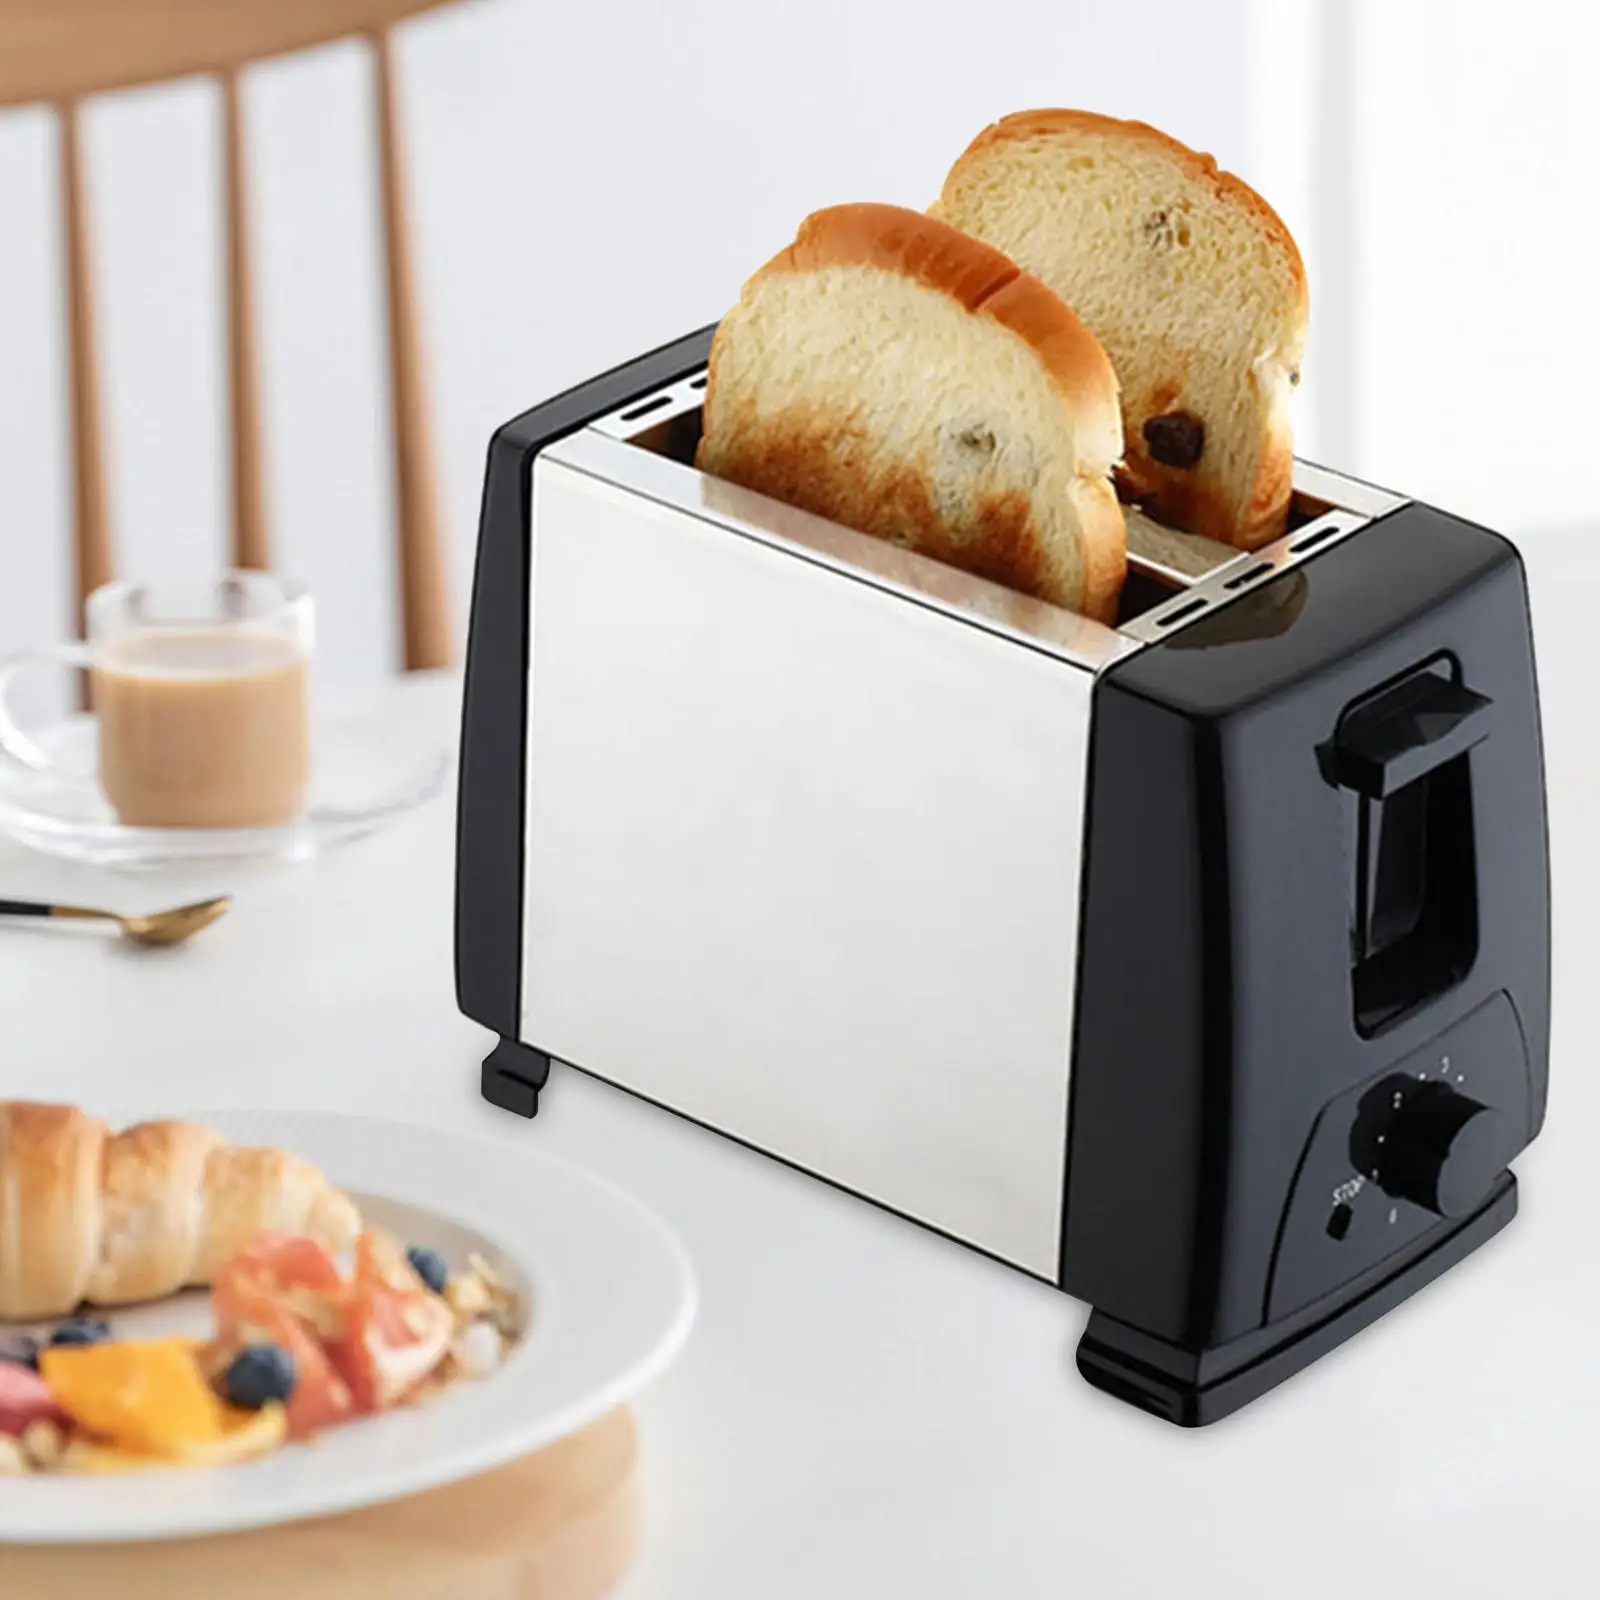 Household Automatic Baking Bread Maker 750W Breakfast Machine Stainless Steel Electric Toaster for Sandwich Cooking Toast Baking